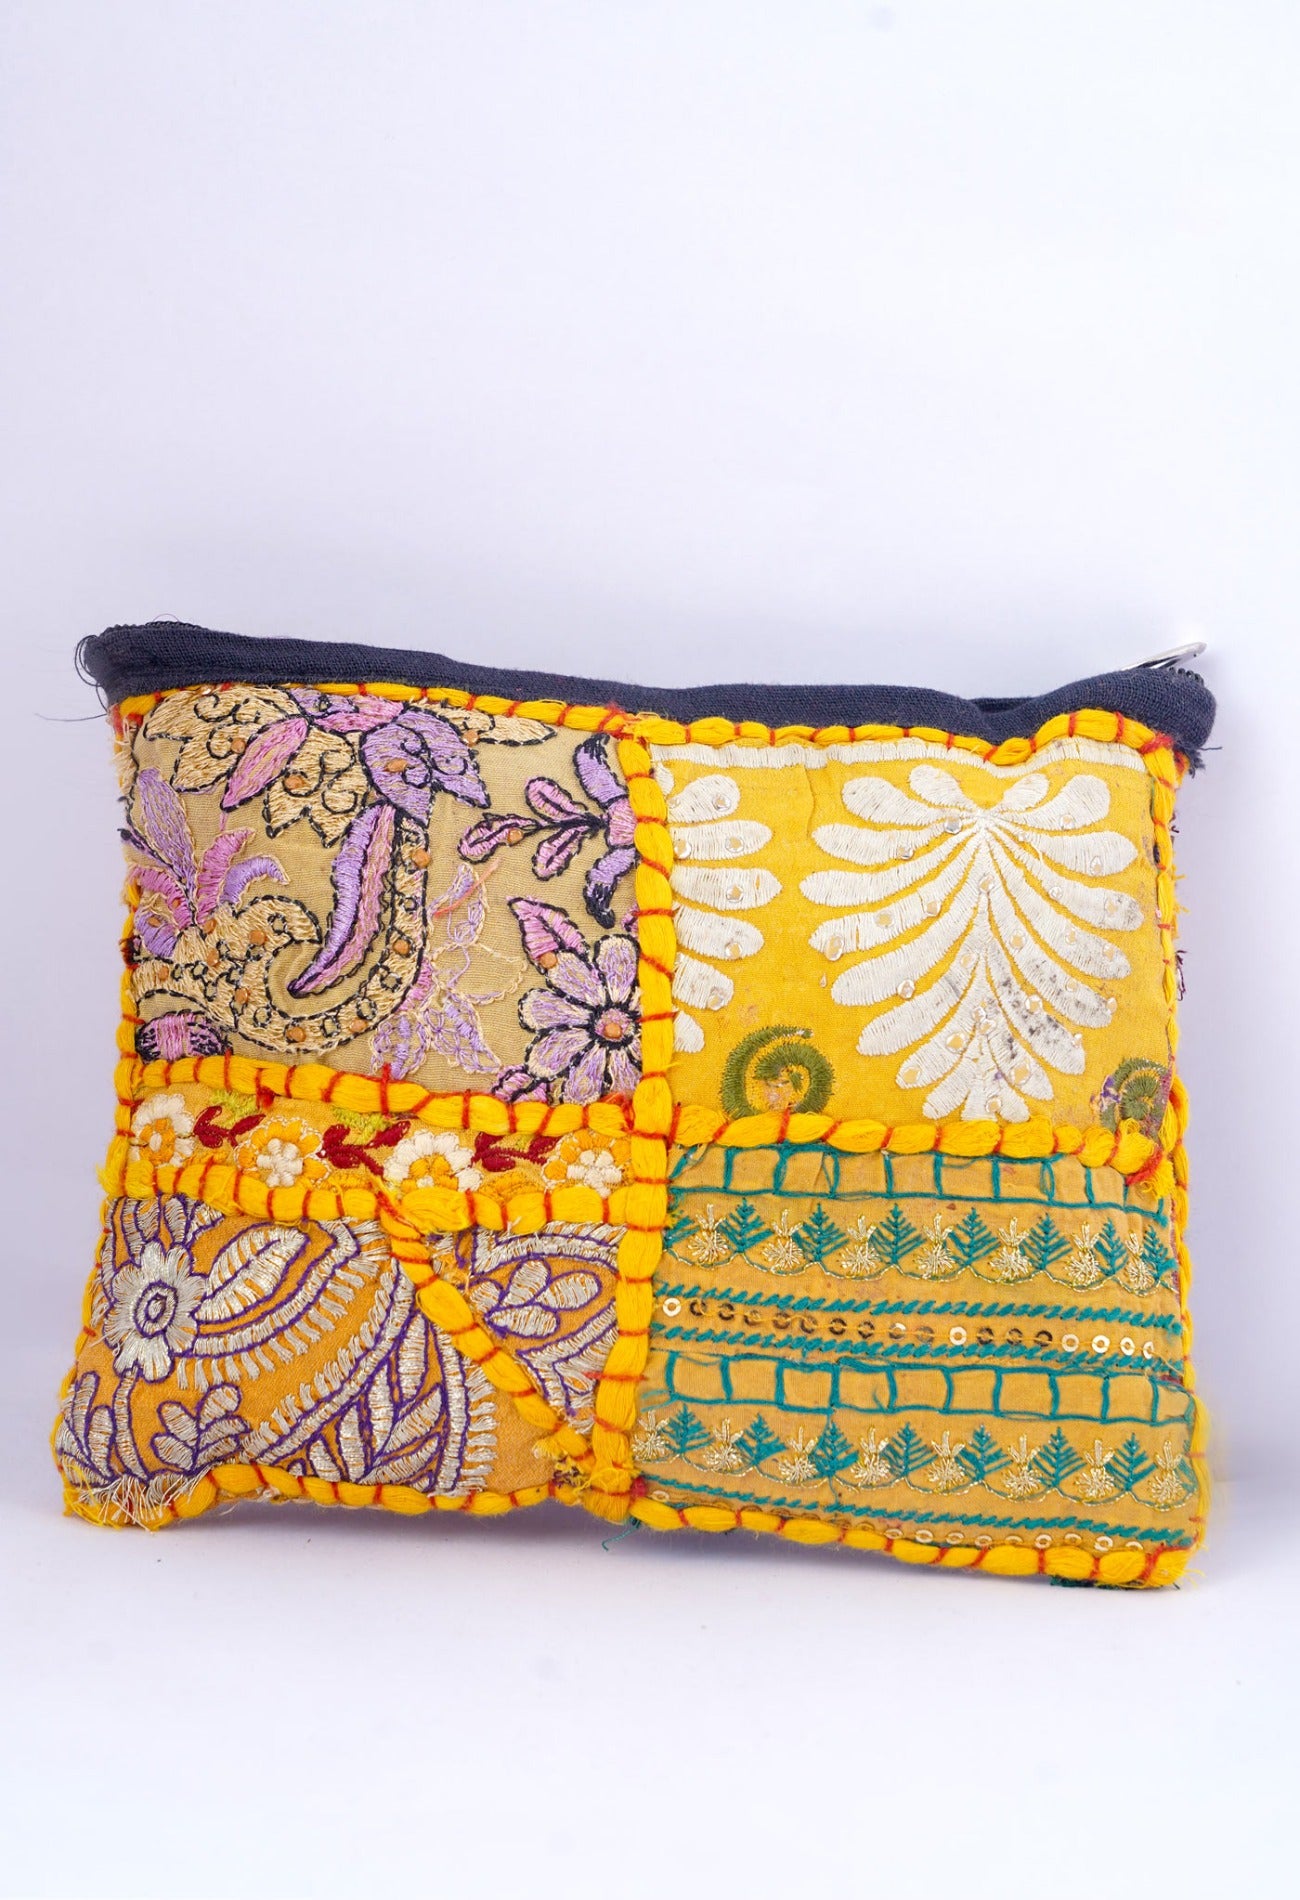 Online Shopping for Yellow Indian Handicraft Embroidered Clutch Bag with Weaving from Rajasthan at Unnatisilks.com India_x000D_
